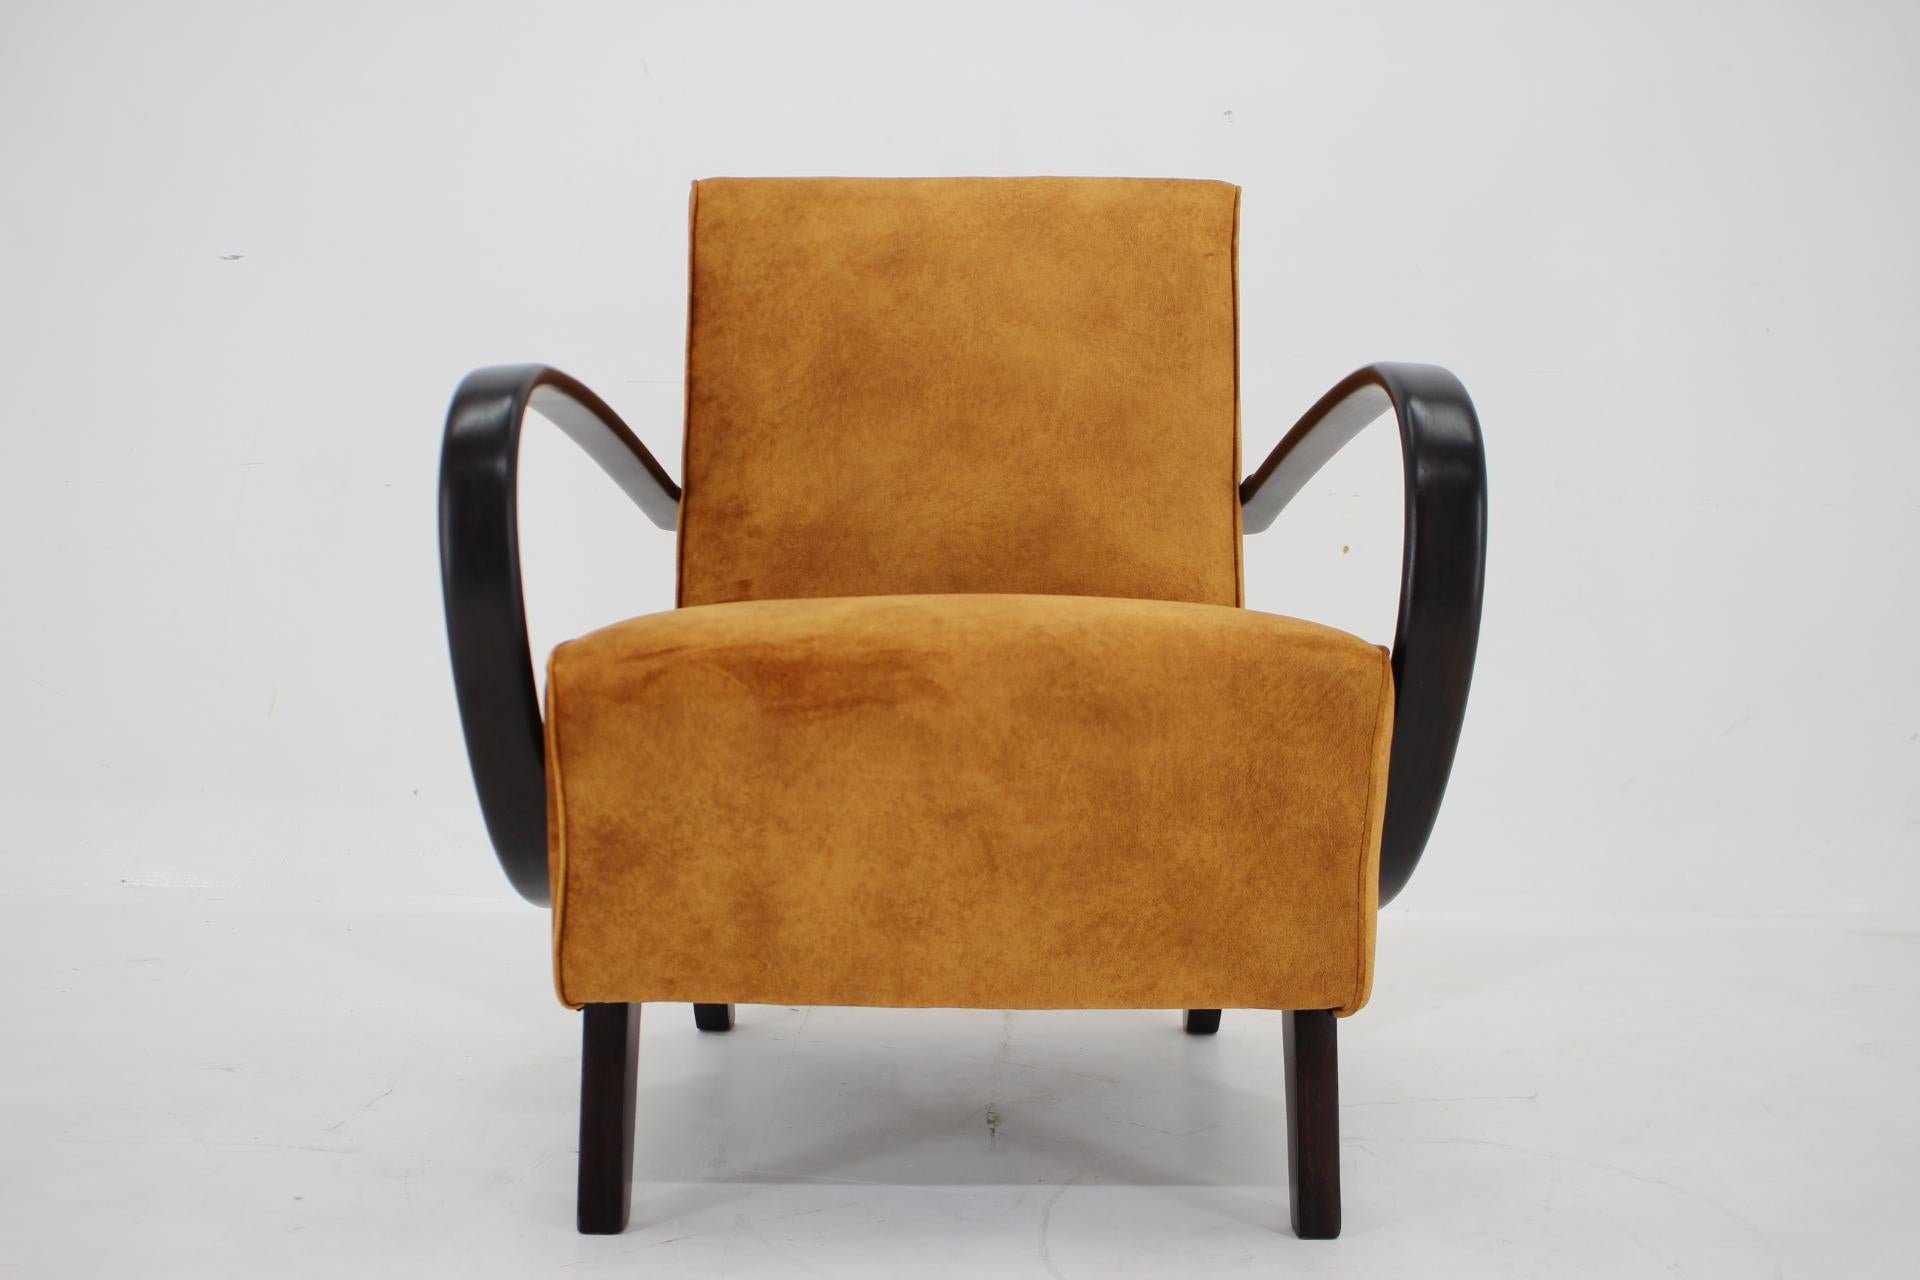 - Newly upholstered 
- The wooden parts have been refurbished 
- The seat height is 45cm 